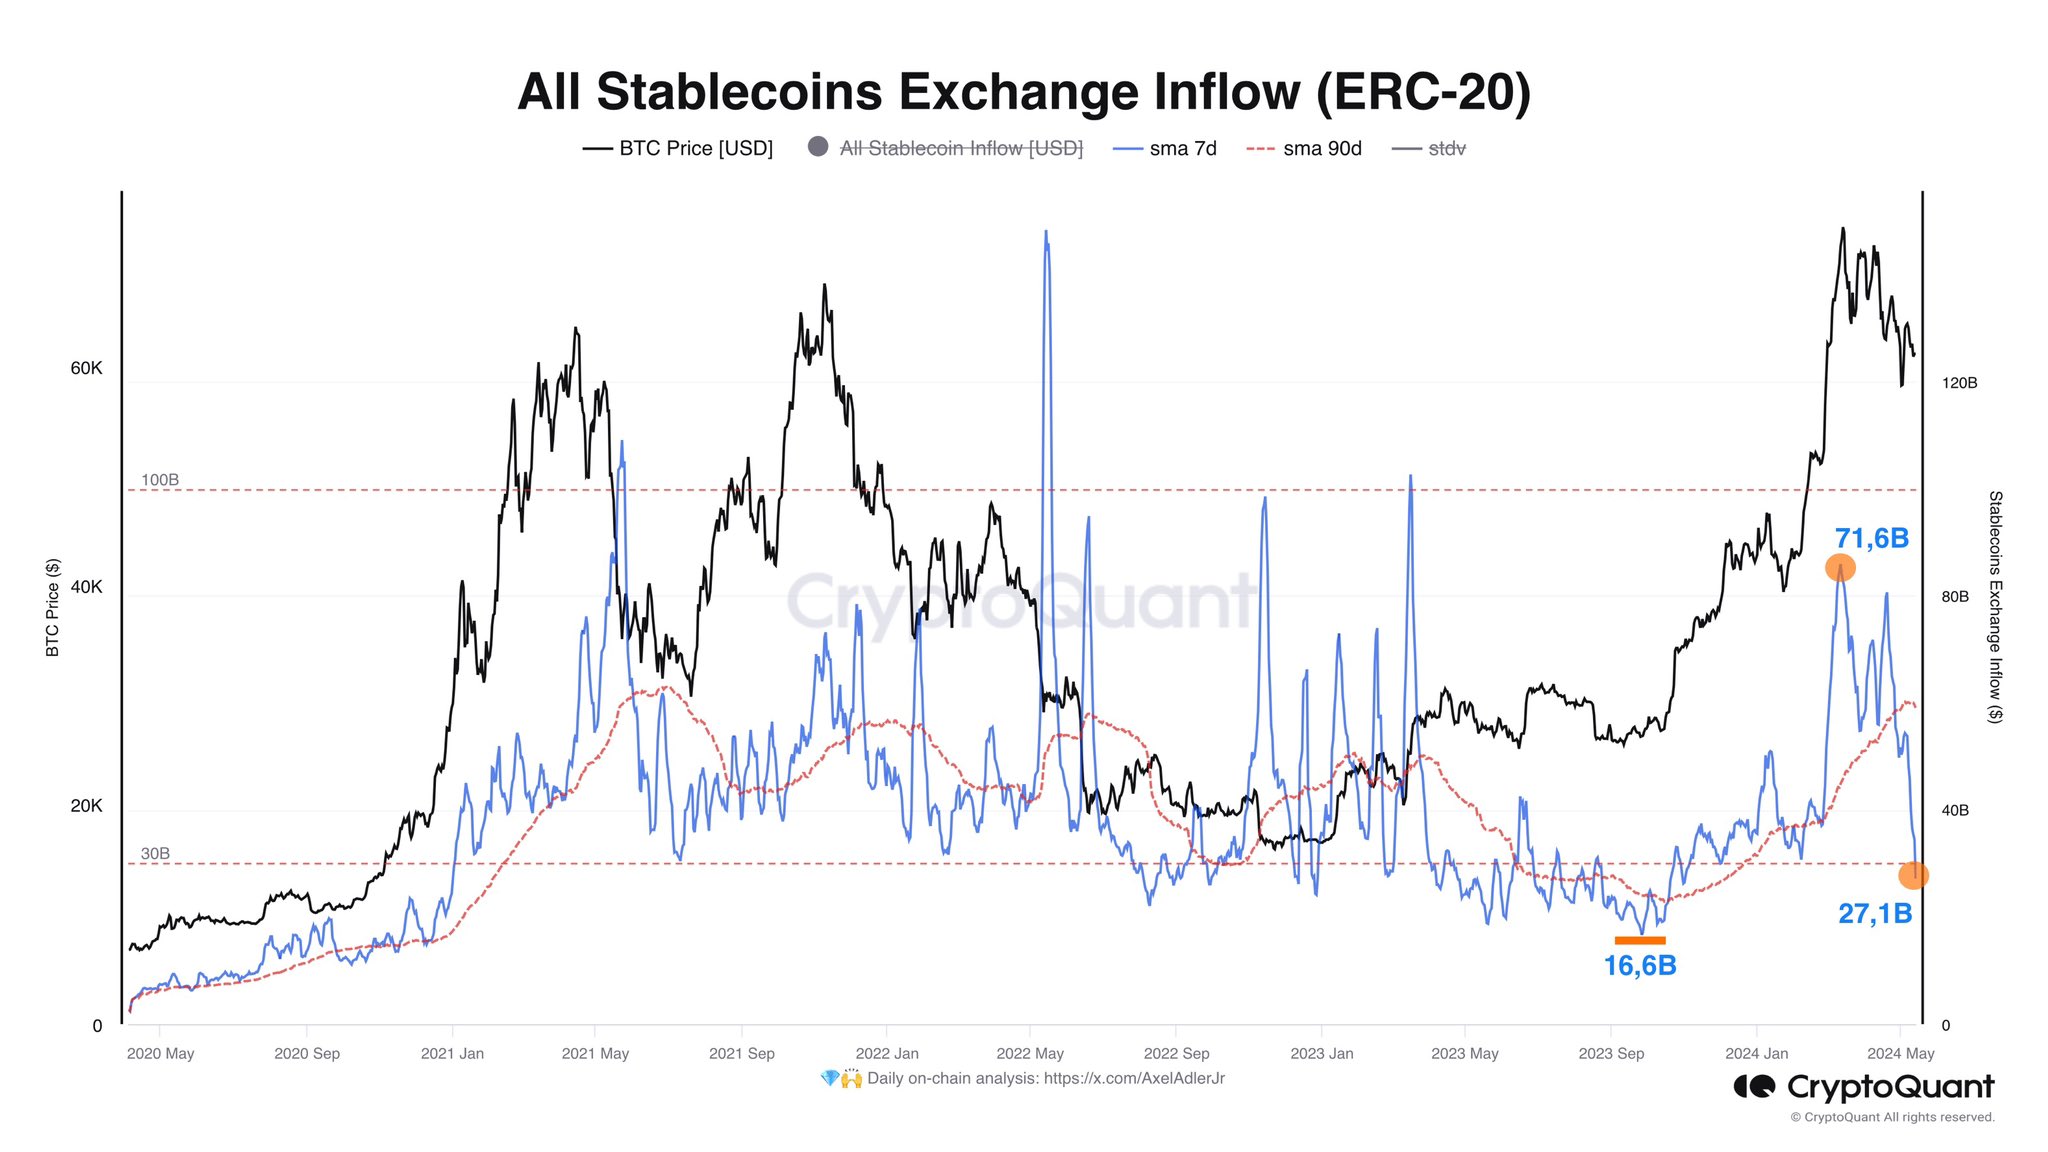 Stablecoin Exchange Inflows See Major Drop: Bad For Bitcoin?